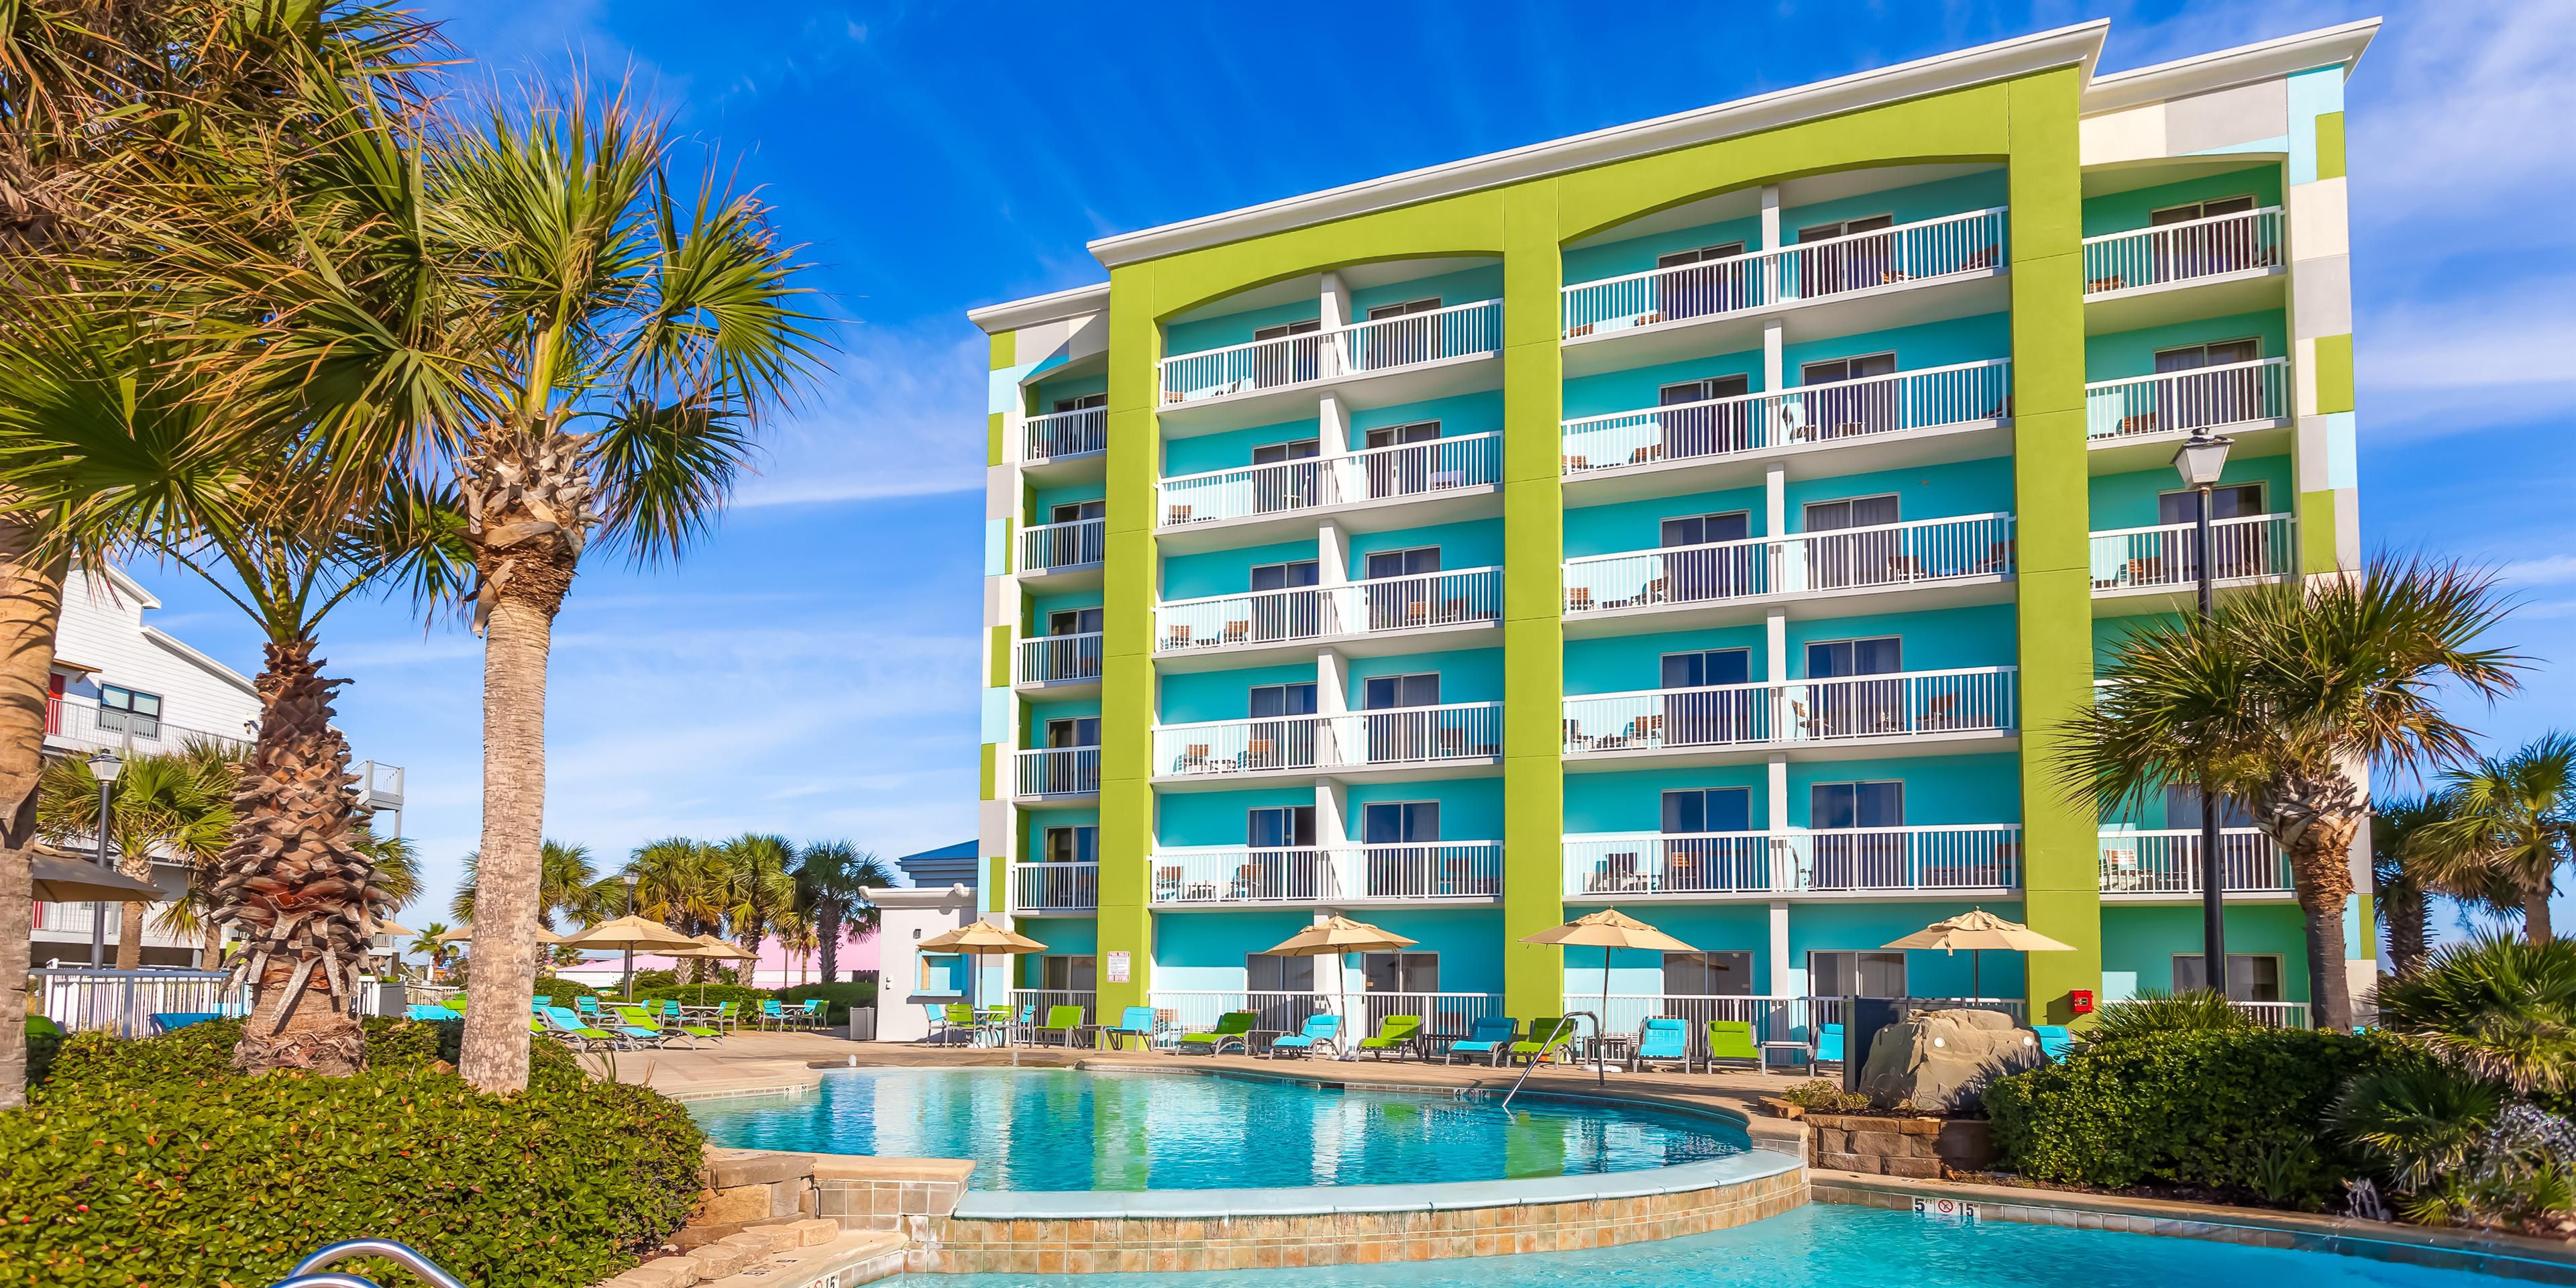 Our beachfront hotel is close to restaurants, shopping, nightlife and popular local attractions in Orange Beach and Gulf Shores, Alabama, including the Amphitheater at the Wharf, Tanger Outlets, Waterville USA, Gulf State Park and the Gulf Islands National Seashore.